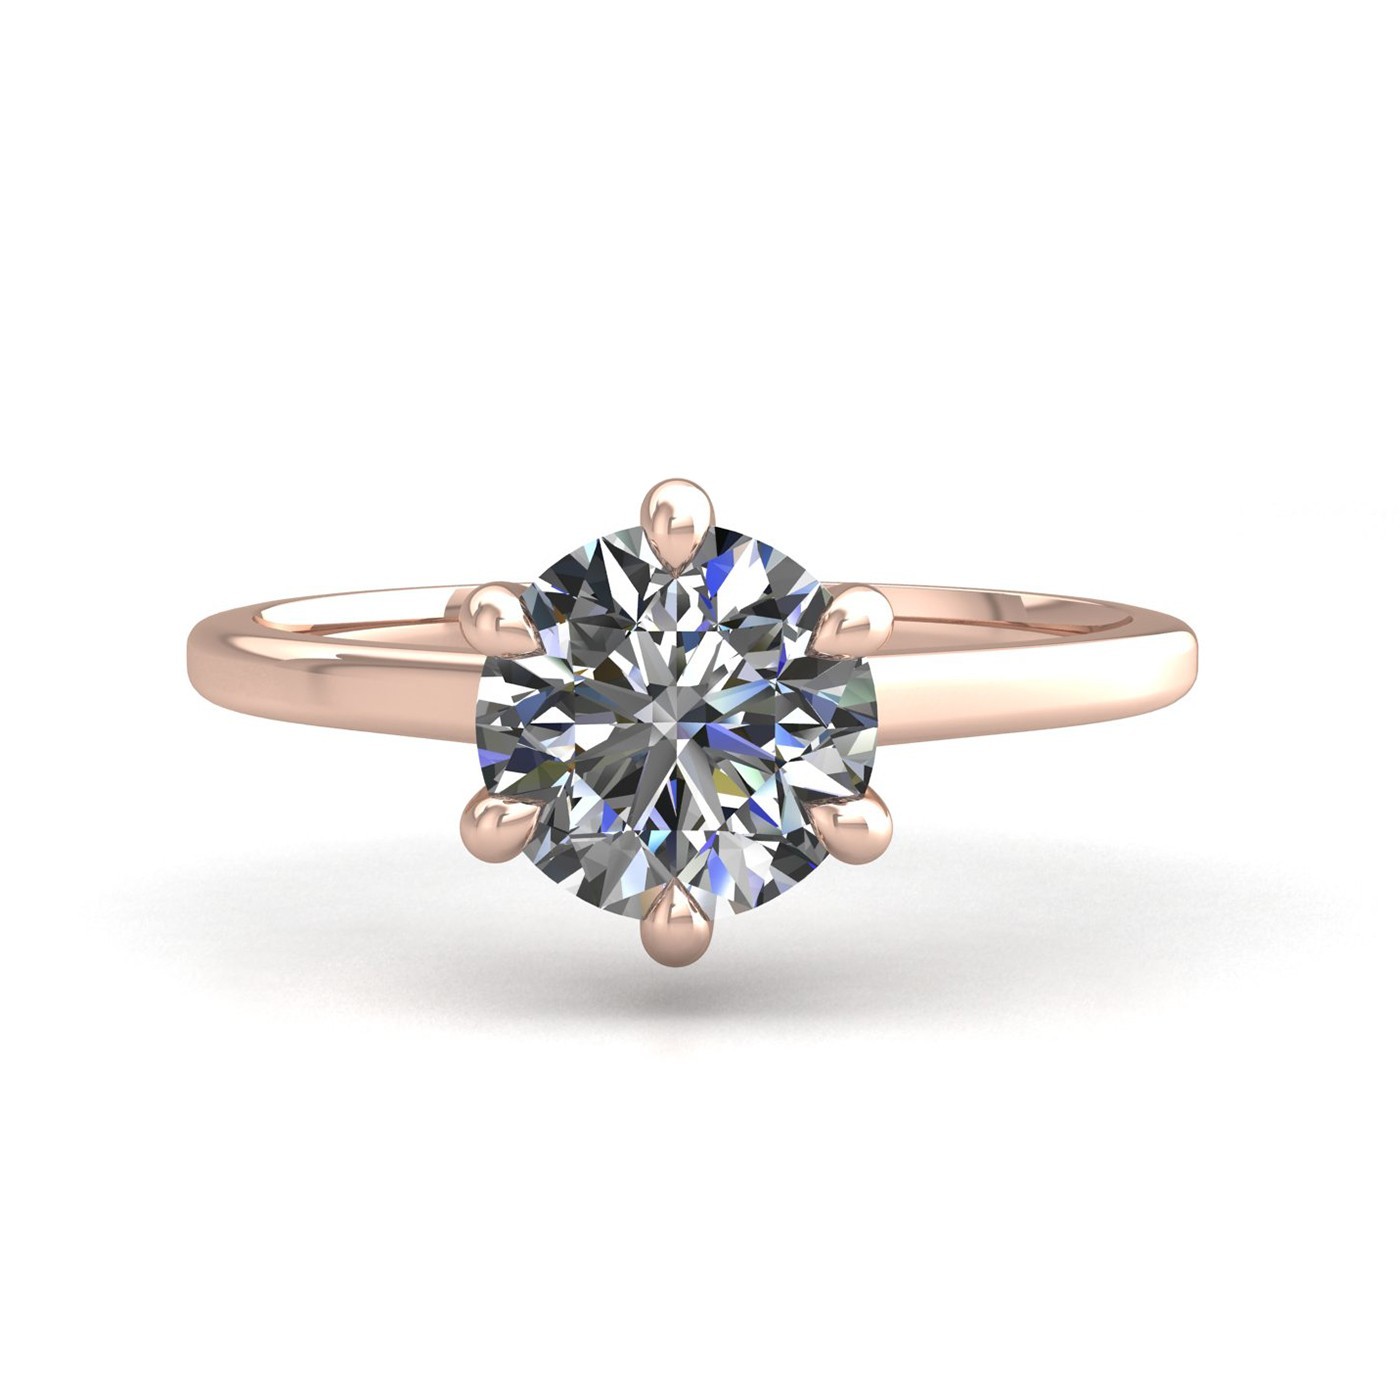 18k rose gold 0,80 ct 6 prongs solitaire round cut diamond engagement ring with whisper thin band Photos & images